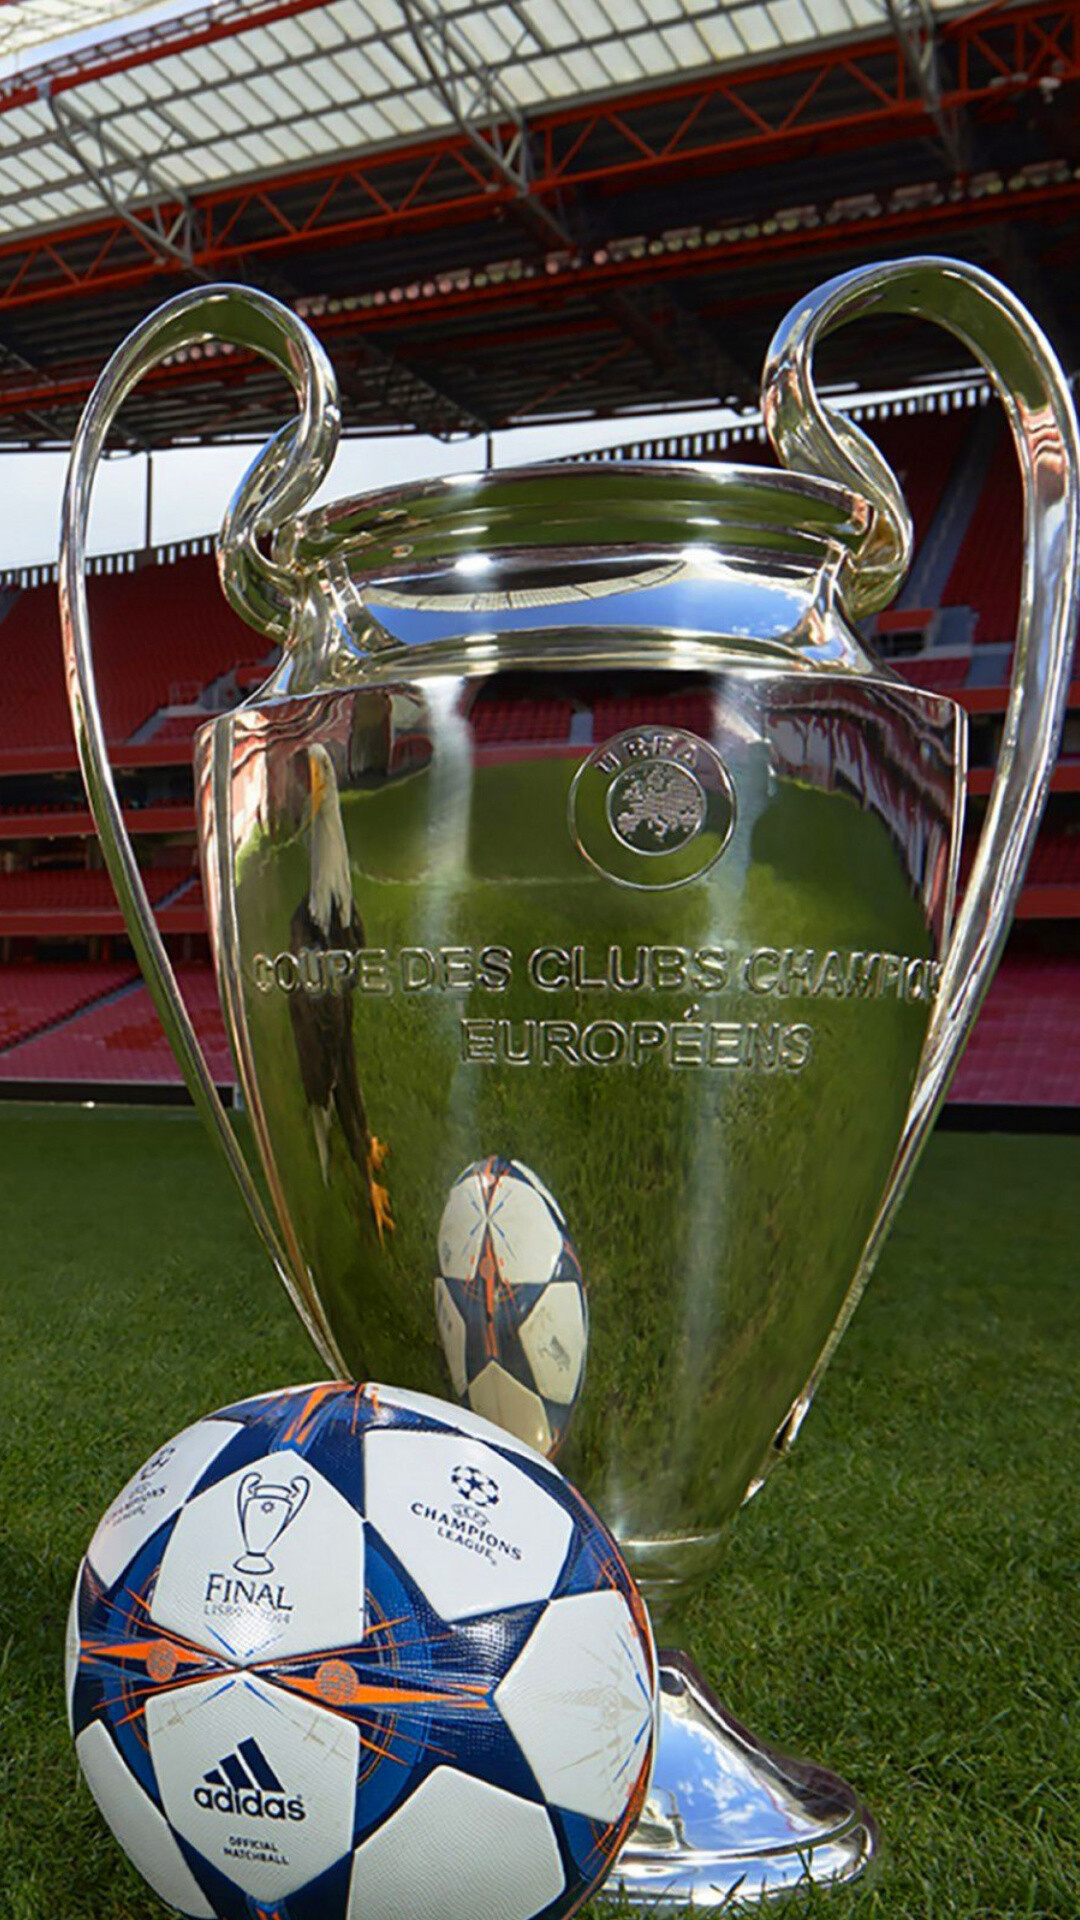 UEFA: Euro Cup, Adidas, A secondary sponsor and supplies the official match ball. 1080x1920 Full HD Wallpaper.